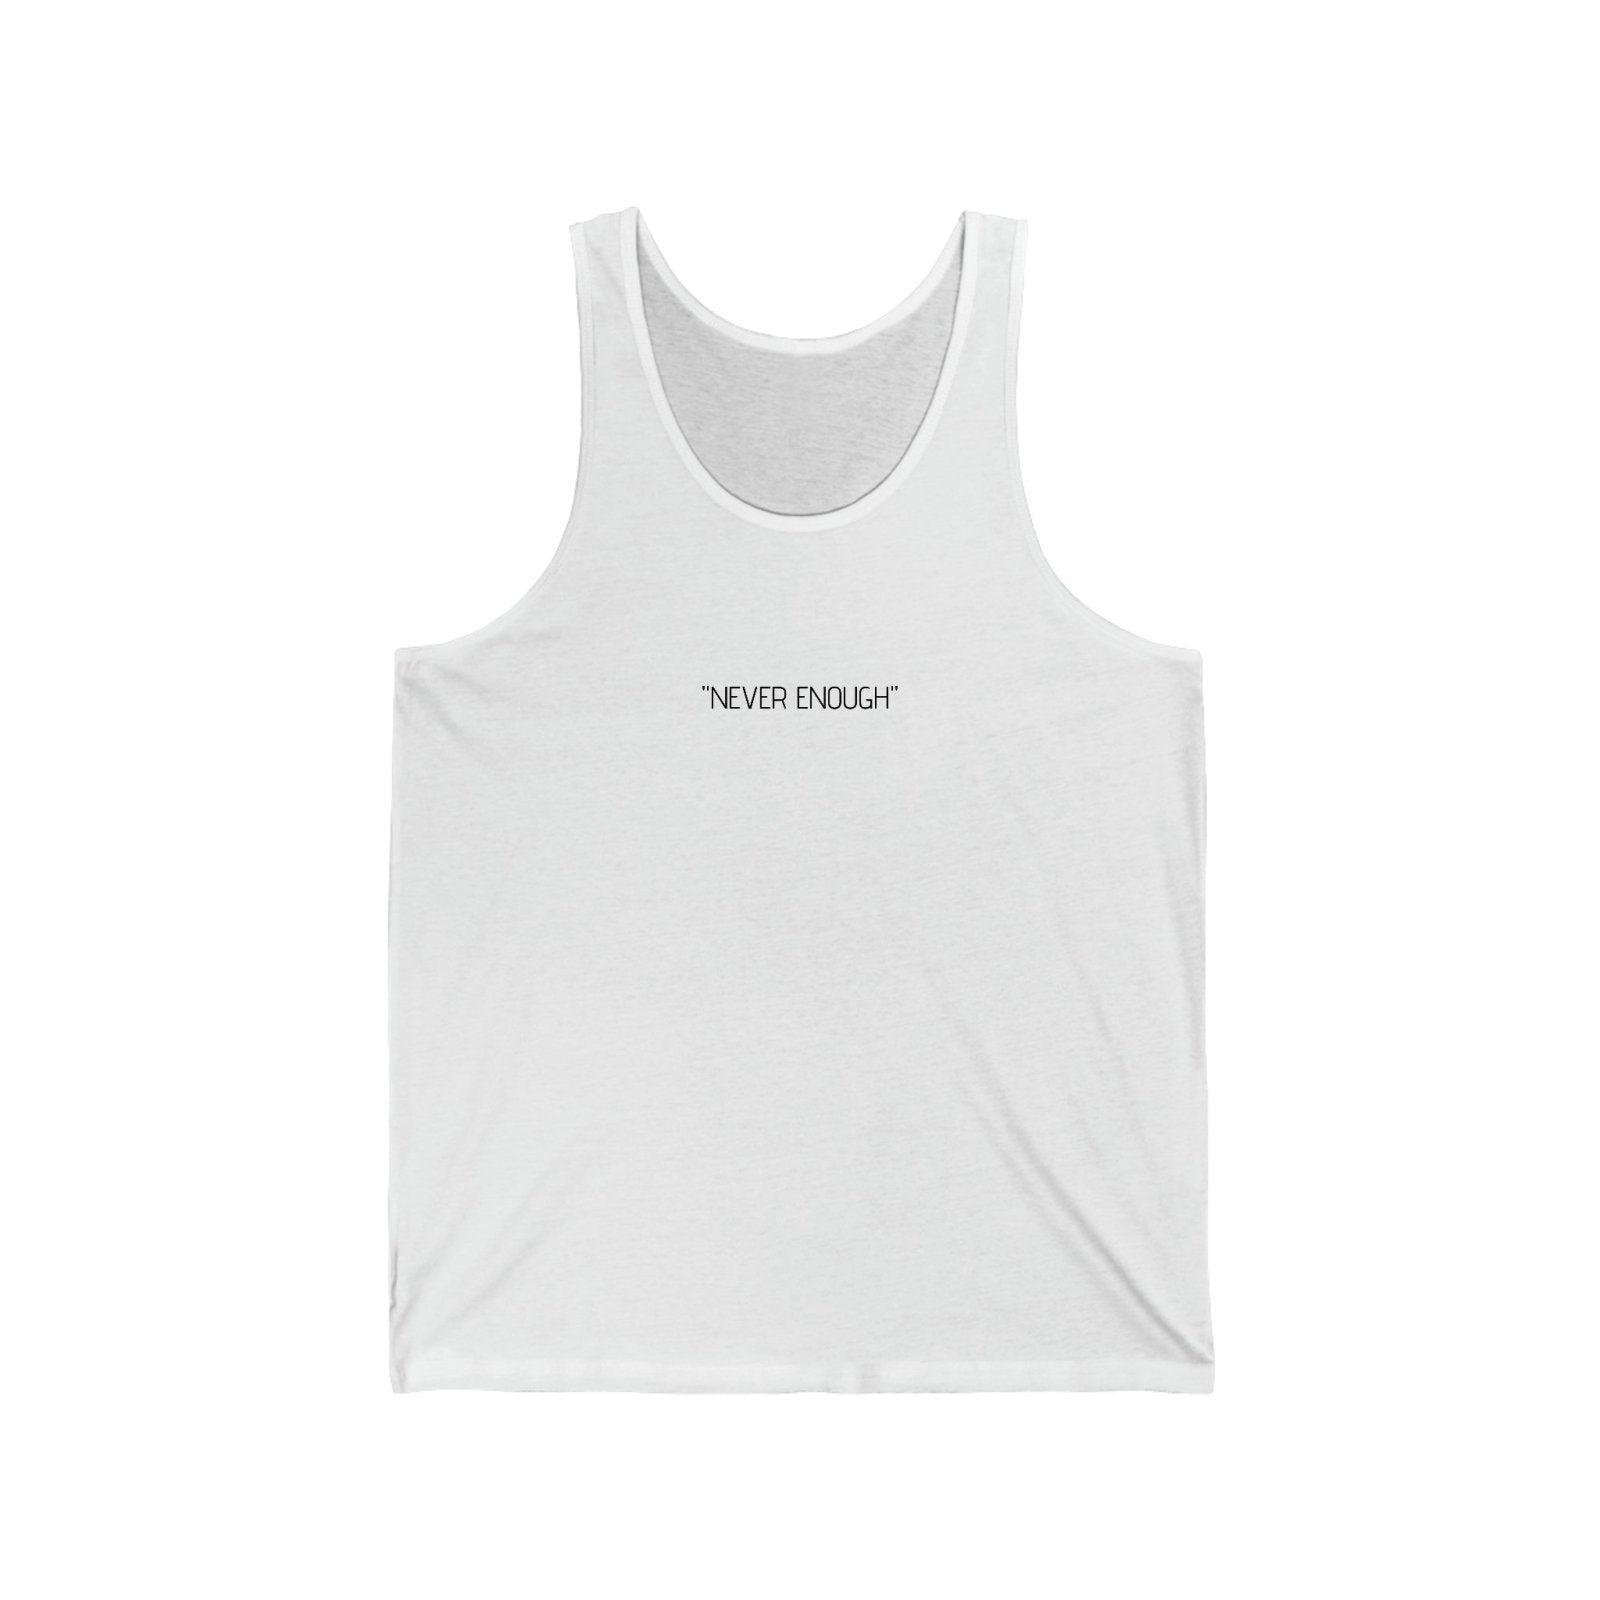 "NEVER ENOUGH" Motivational Jersey Tank - Dowding